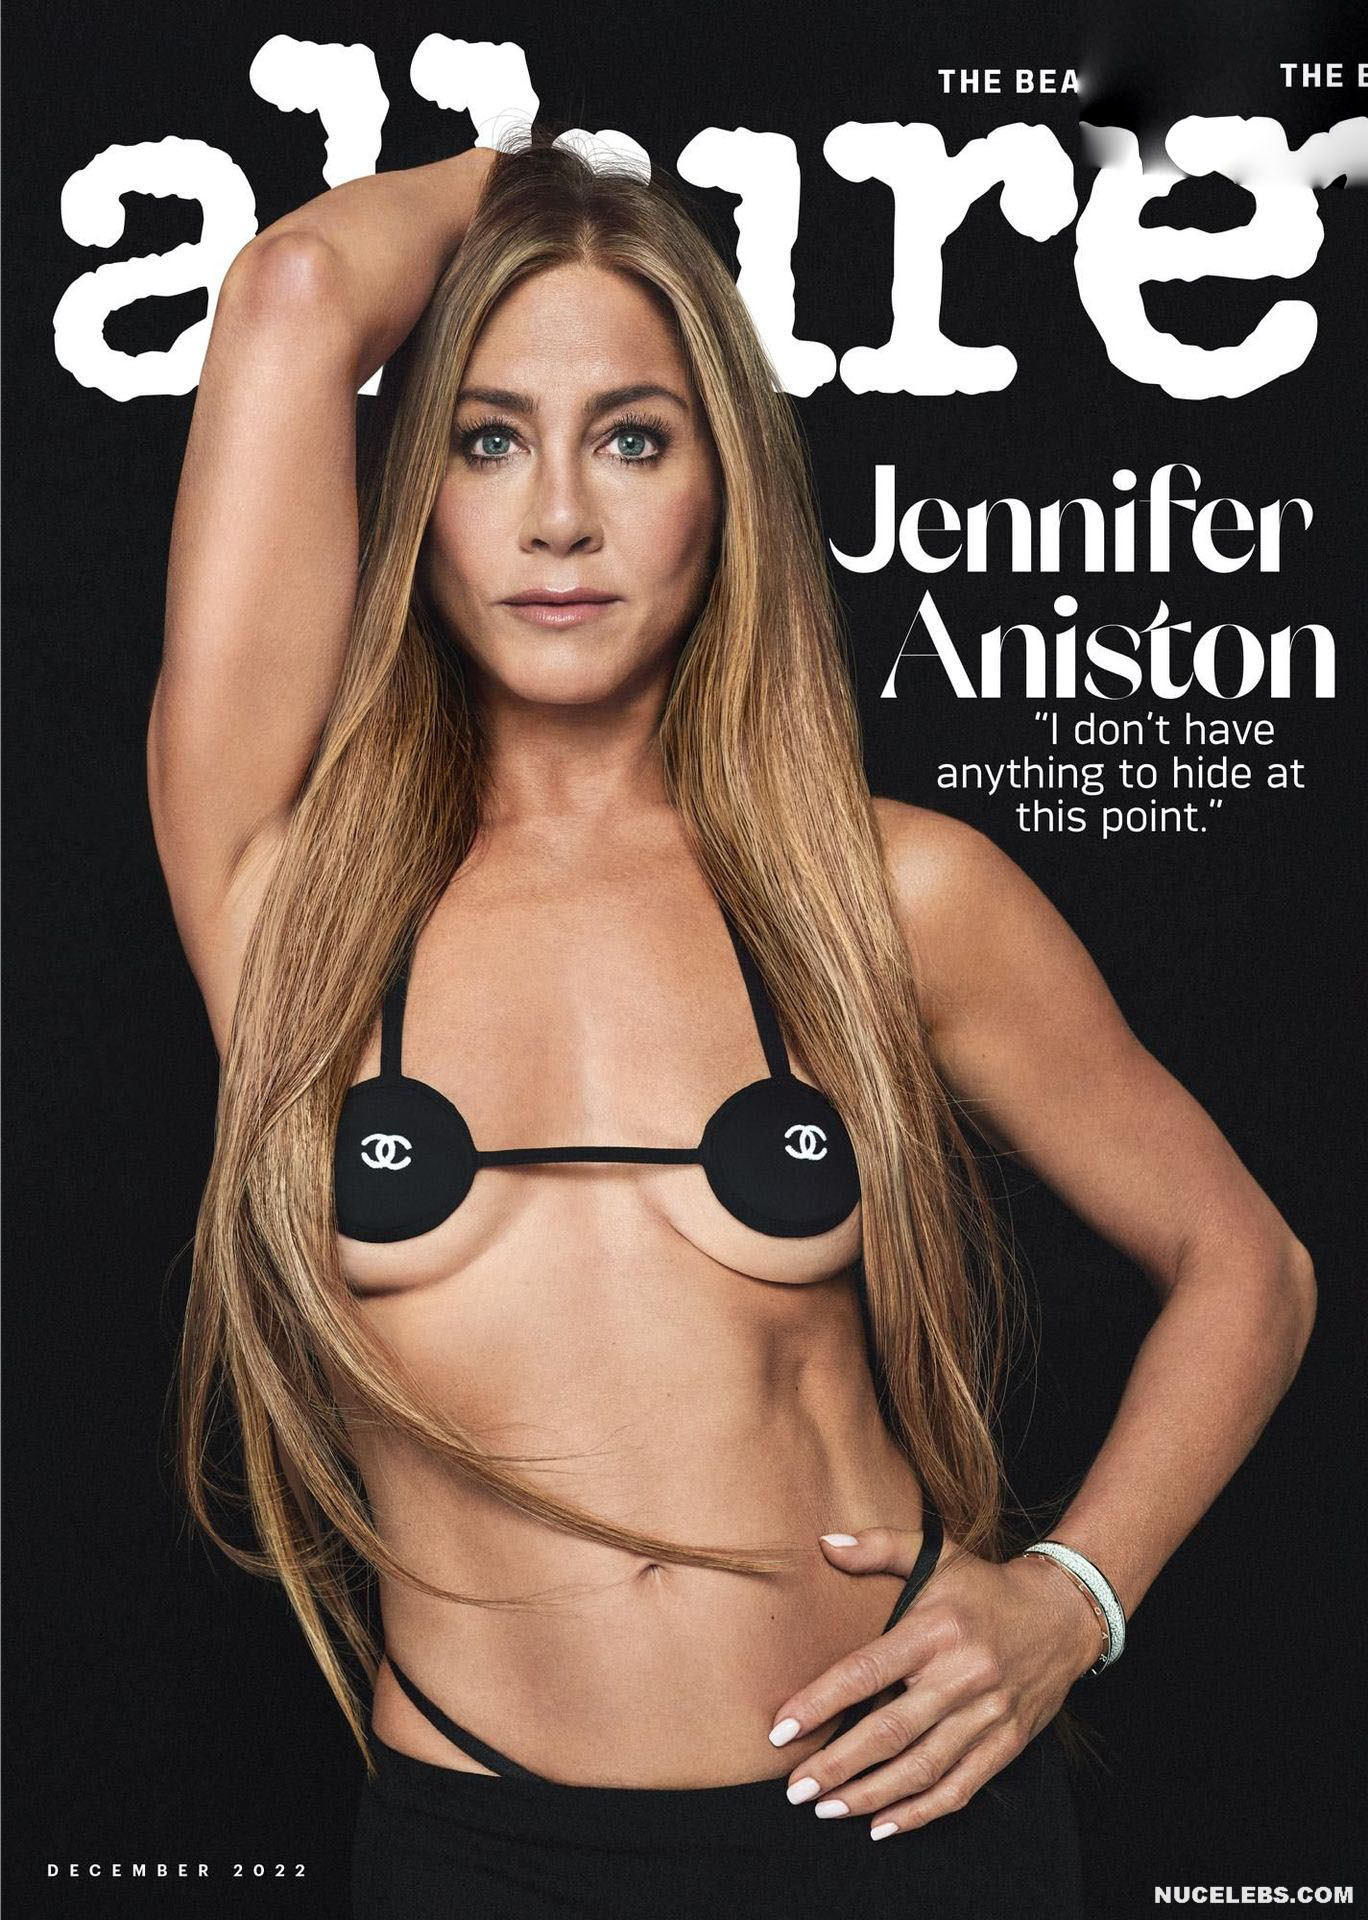 cathy bruen recommends Jennifer Aniston Nude Images